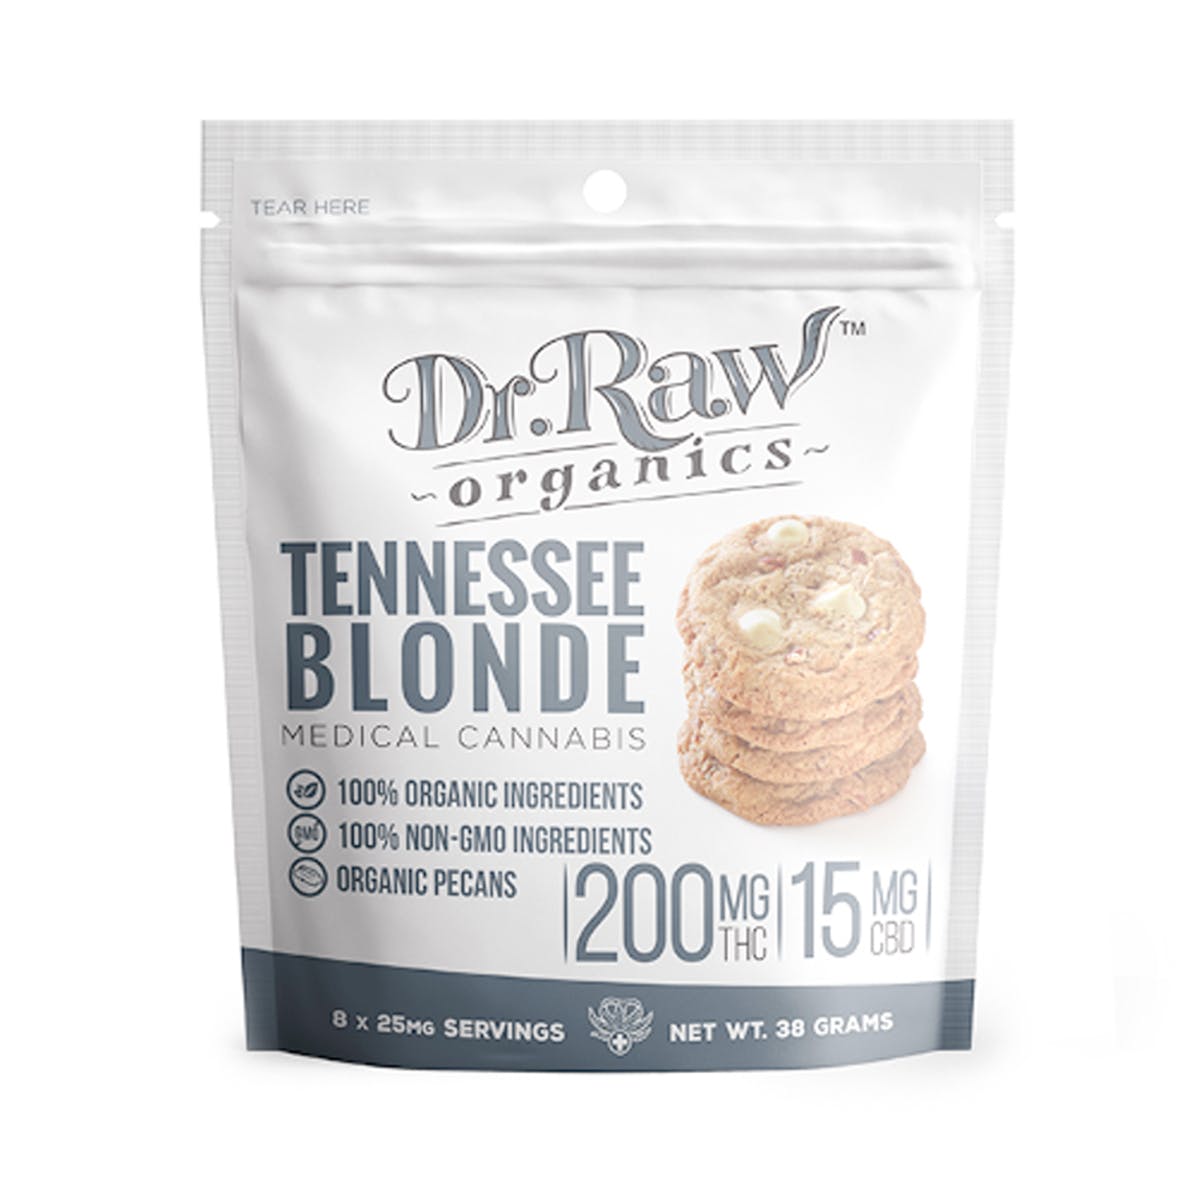 Tennessee Blonde 200mg